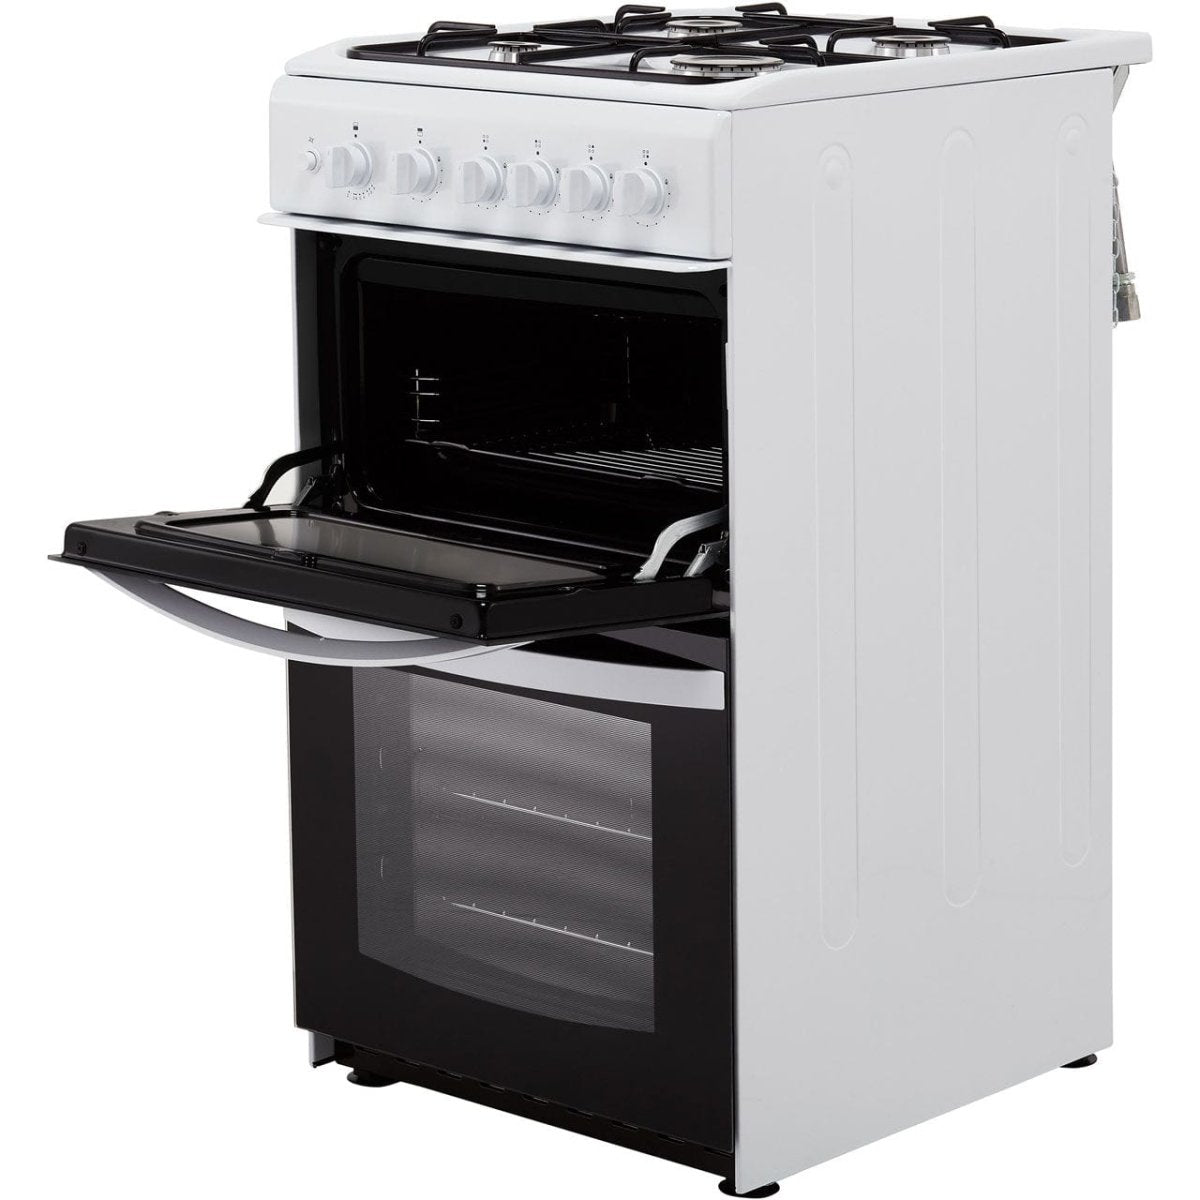 Indesit Cloe ID5G00KMW 50cm Gas Cooker with Full Width Gas Grill - White - A Rated | Atlantic Electrics